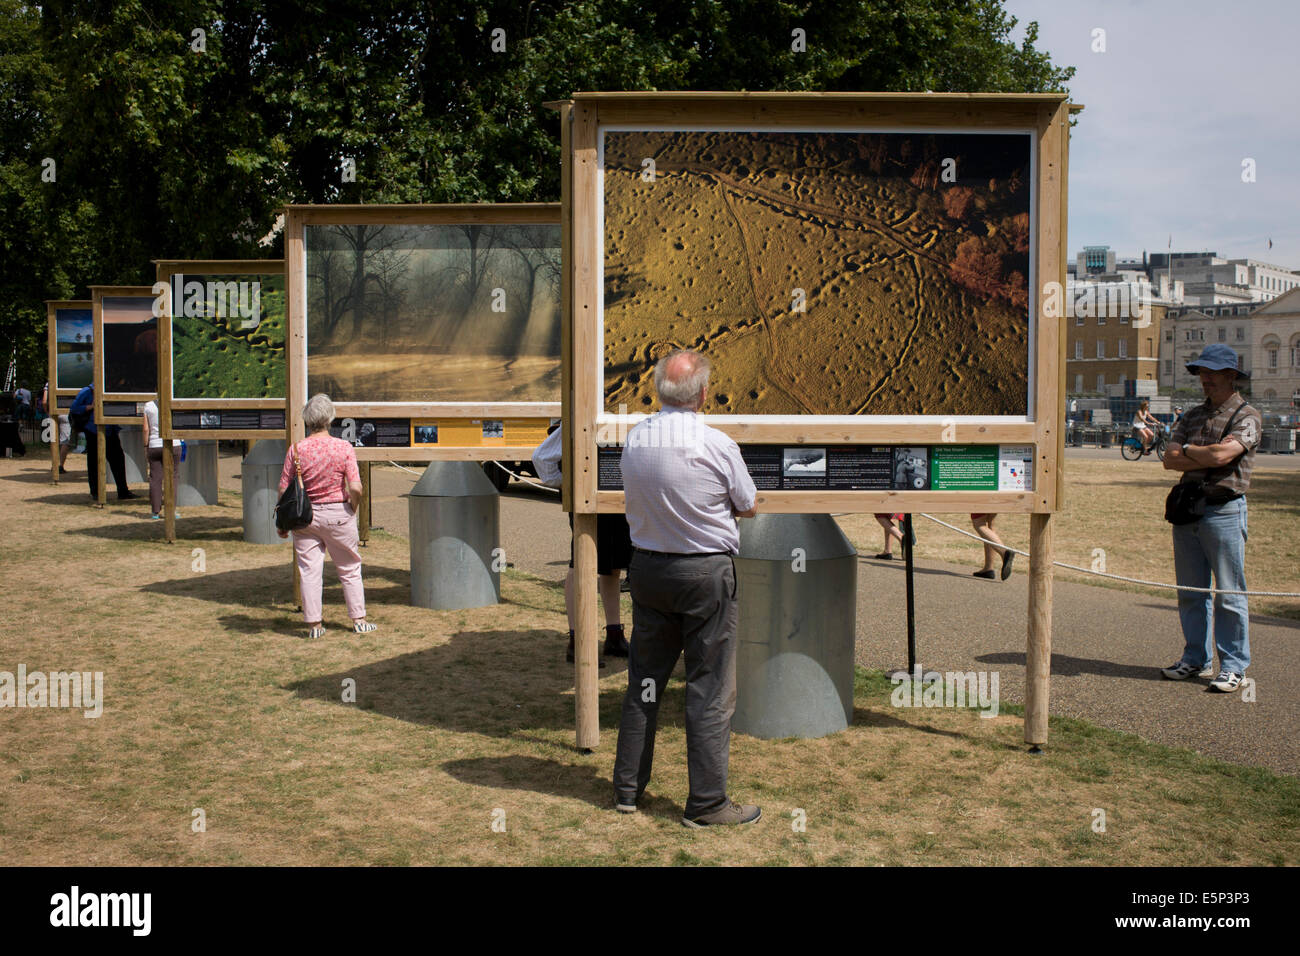 London, UK. 4th Aug, 2014. Marking the centenary of the the beginning of the First World War (WW1) in 1914, visitors to the Heritage Lottery funded, Fields of Battle Lands of Peace Street Gallery in St James's Park, central London, an outdoor exhibition of photography by Michael St Maur Sheil's 7-year project recording the landscapes of battefields along the Western front. Aerial views of Beaumont Hamel trenches include scarring in the land by shell holes. Across the world, remembrance ceremonies for this historic conflict that affected world nations. Credit:  RichardBaker/Alamy Live News Stock Photo